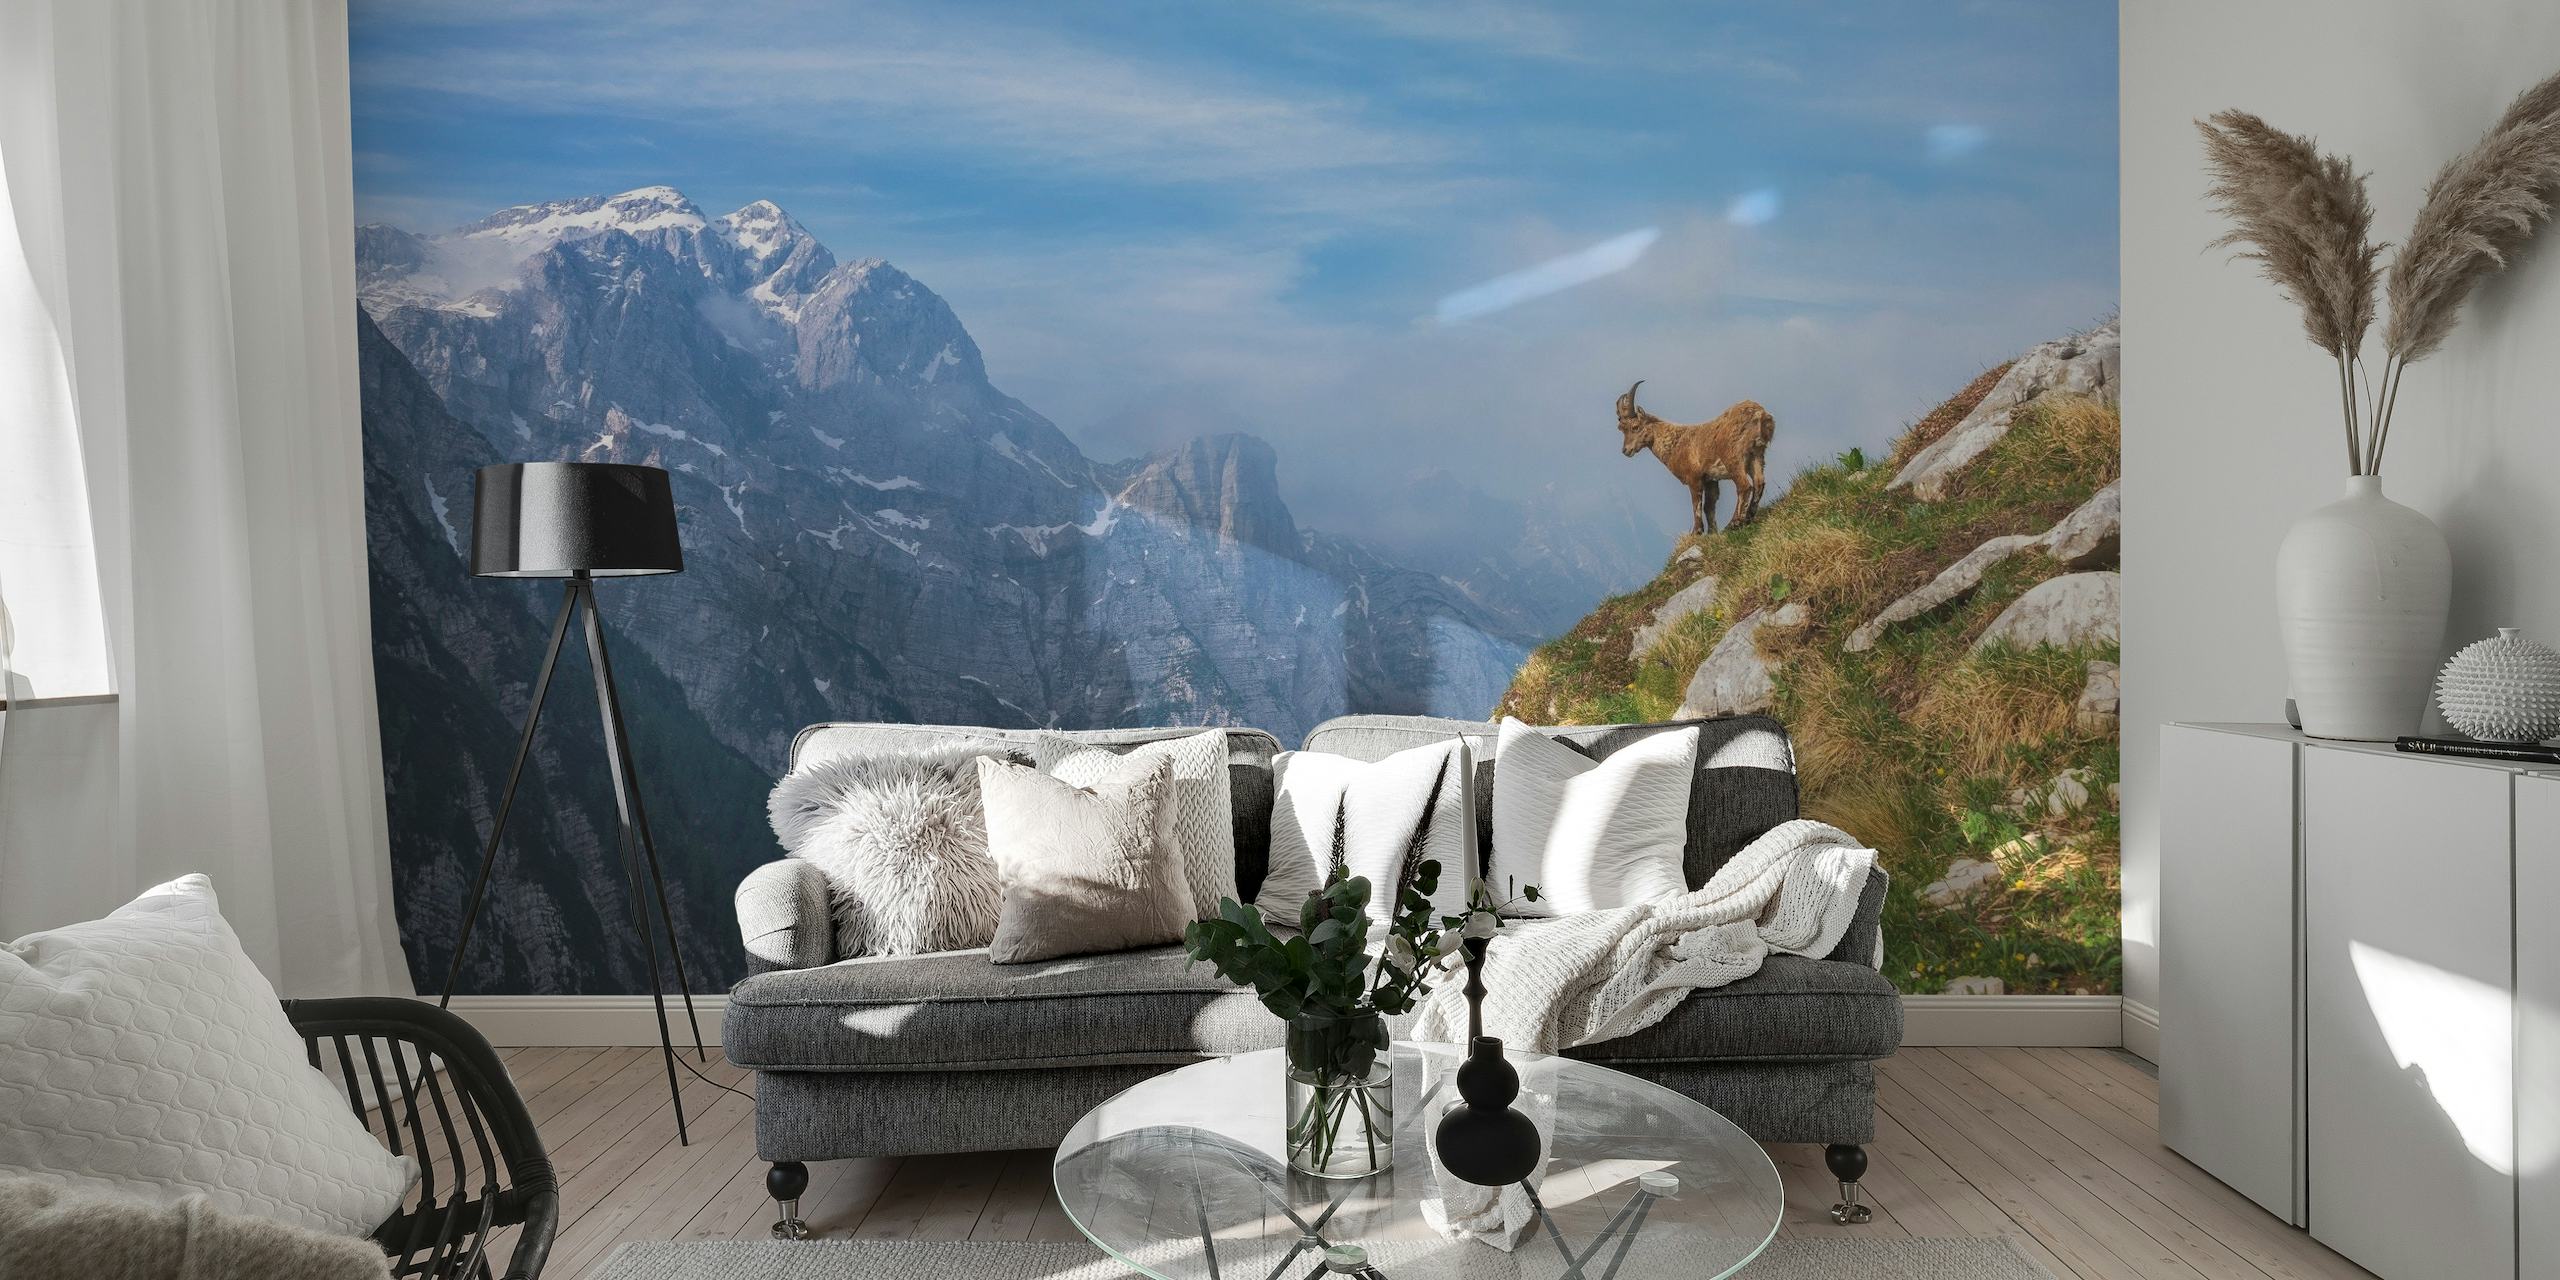 Alpine Ibex standing on a mountain ledge with scenic mountain views in the background